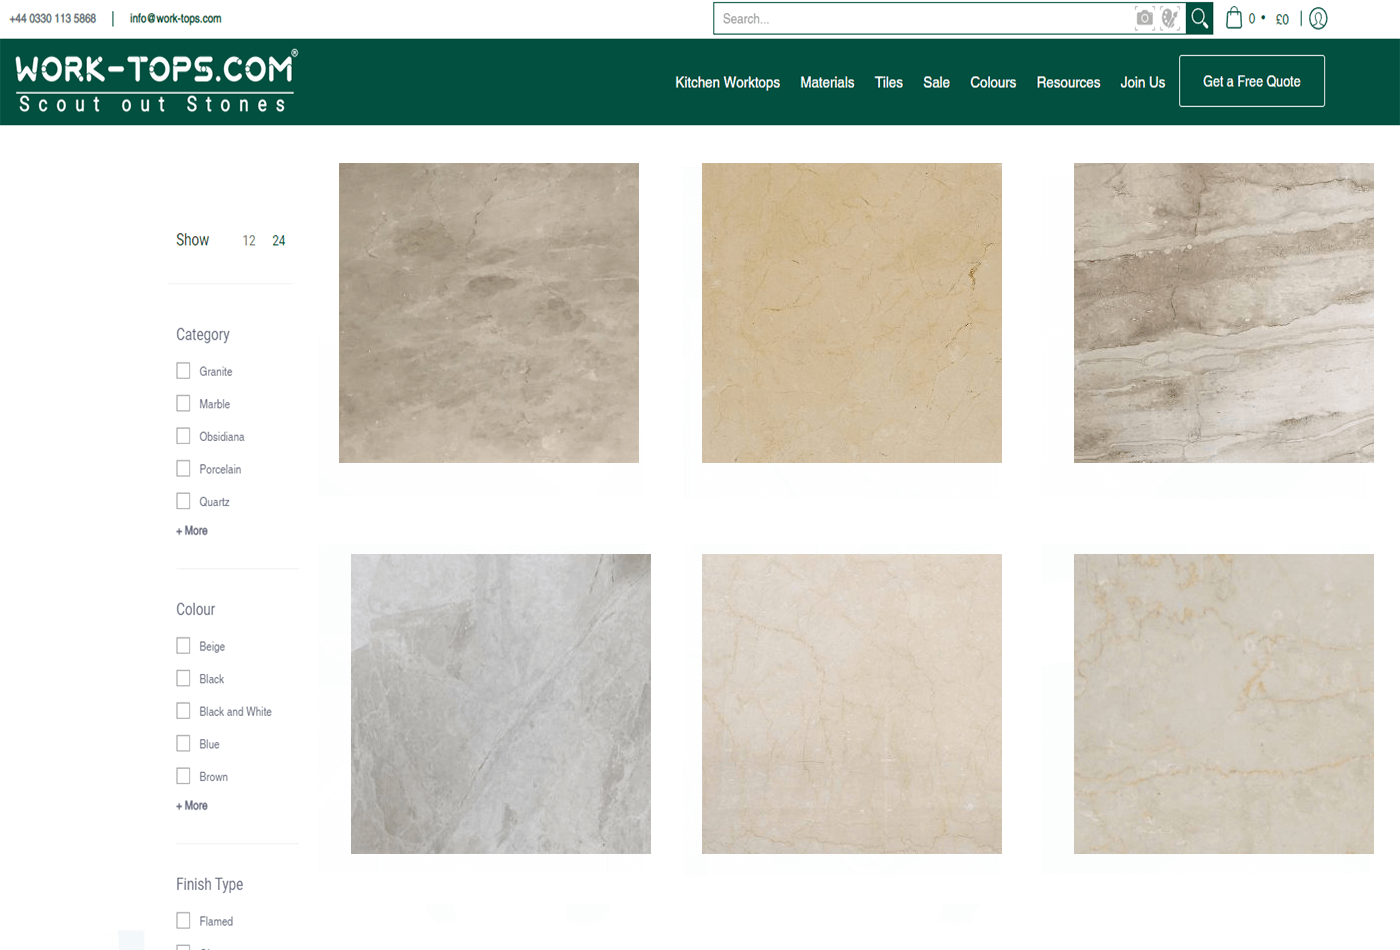 Huge Range of Similar Stones for Your Home: